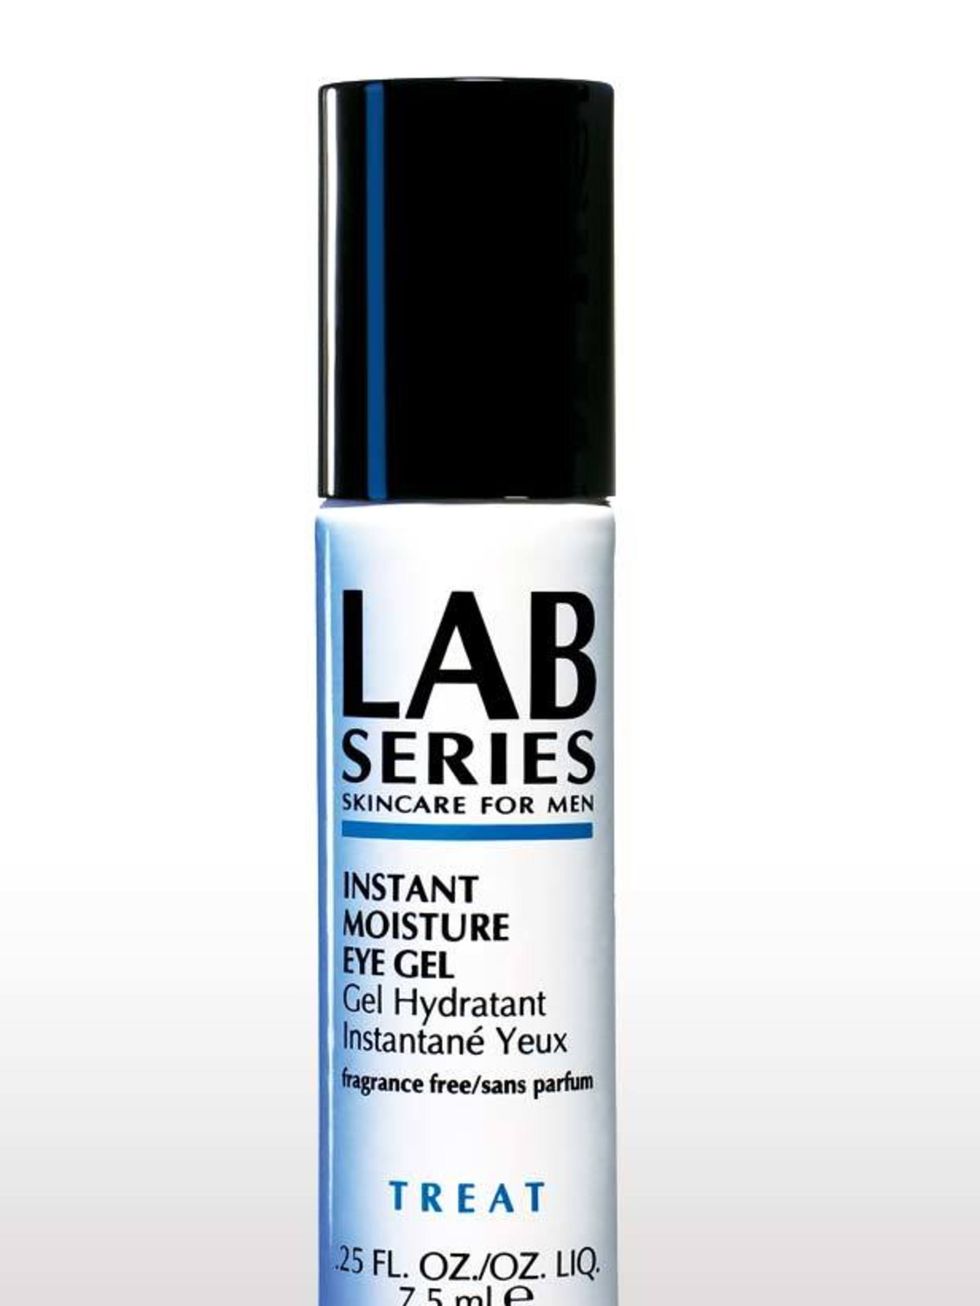 <p>For some men, eye cream is taking the grooming thing a tad too far. Hit them with a gimmick to make the transition from mans man to expert groomer that bit easier. Lab Series Instant Moisture Eye Gel, £16.50, comes with a cooling roller ball that will